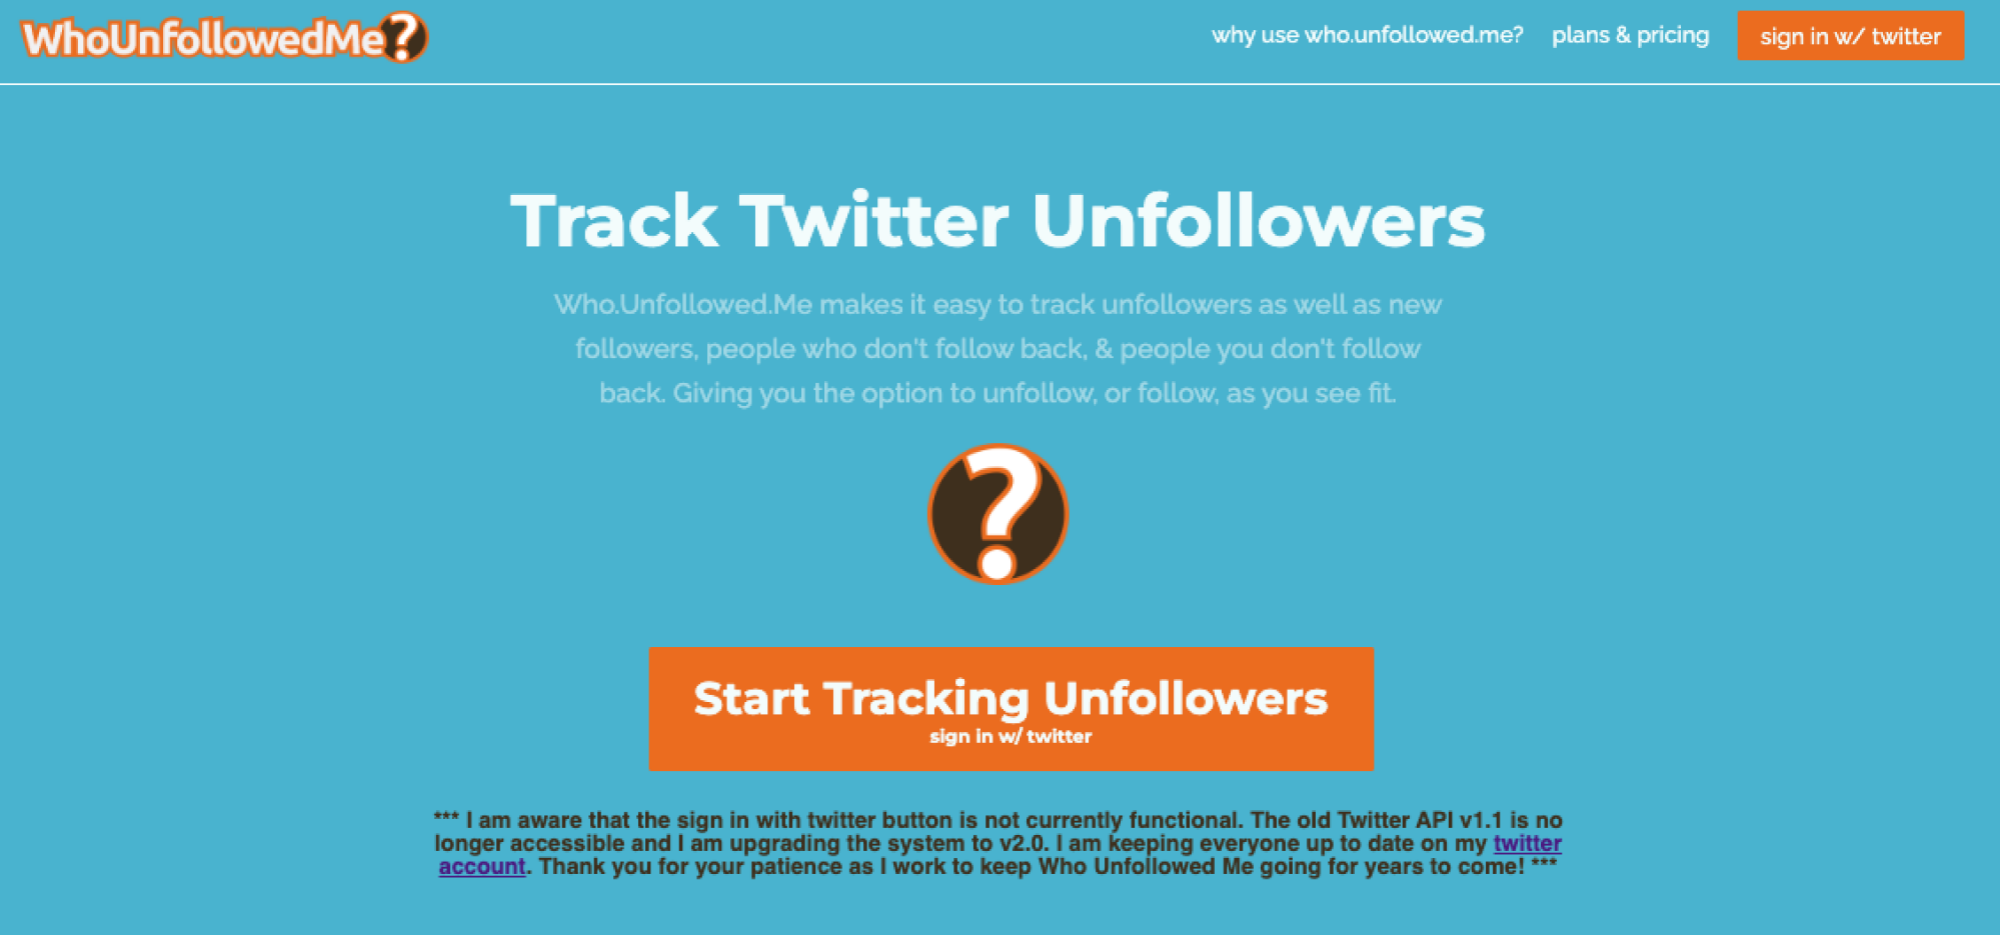 Who Unfollowed Me homepage